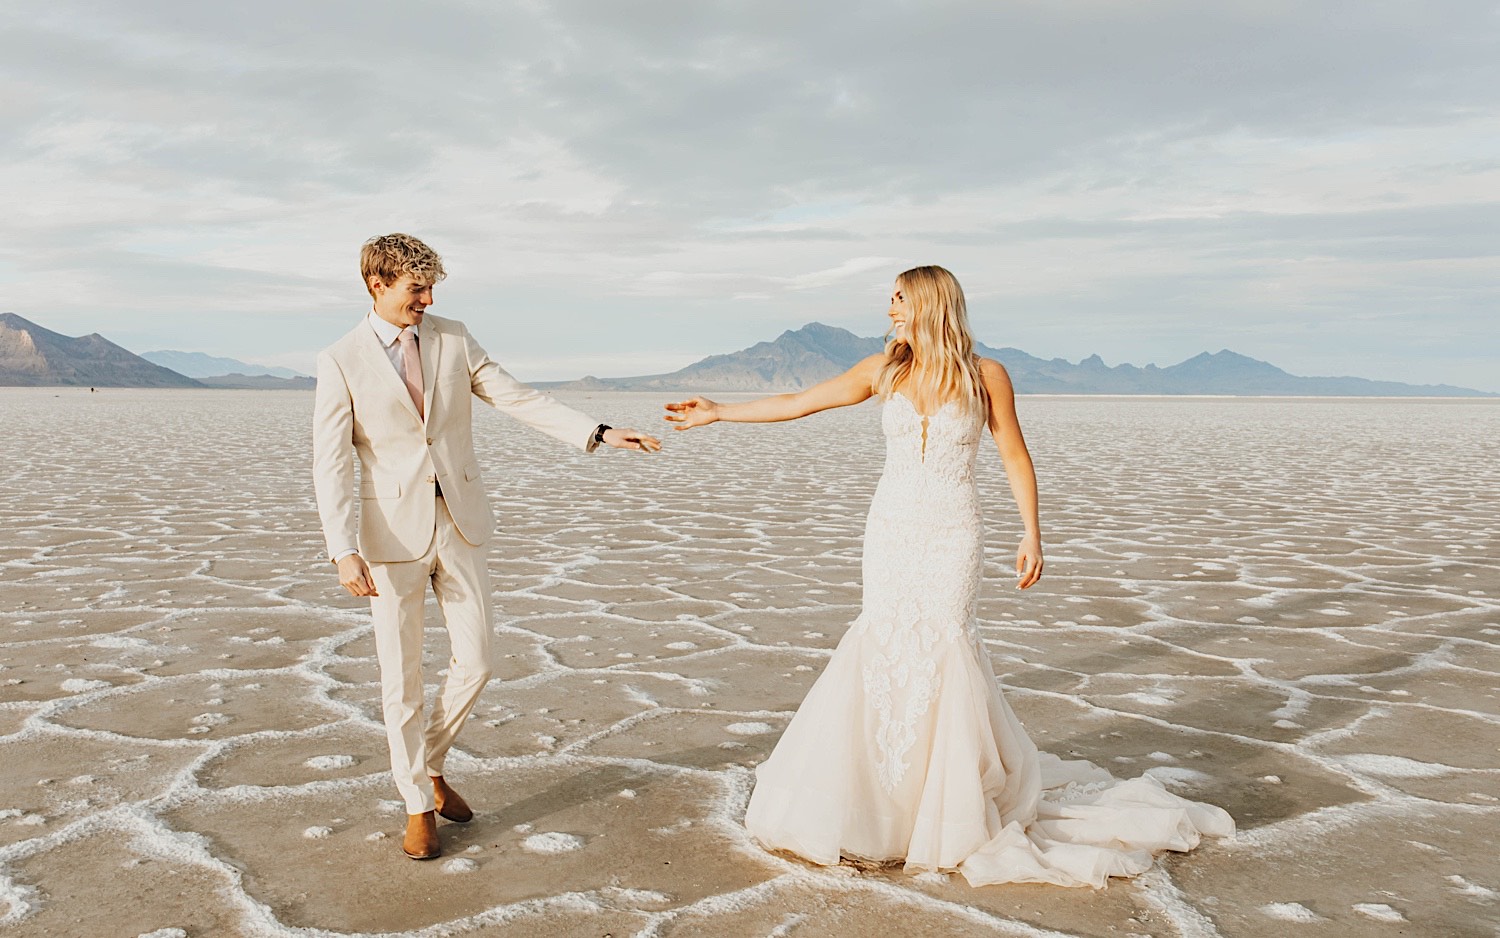 At their elopement in the Utah Salt Flats, a bride and groom smile at one another and reach their hands towards one another while walking towards the camera